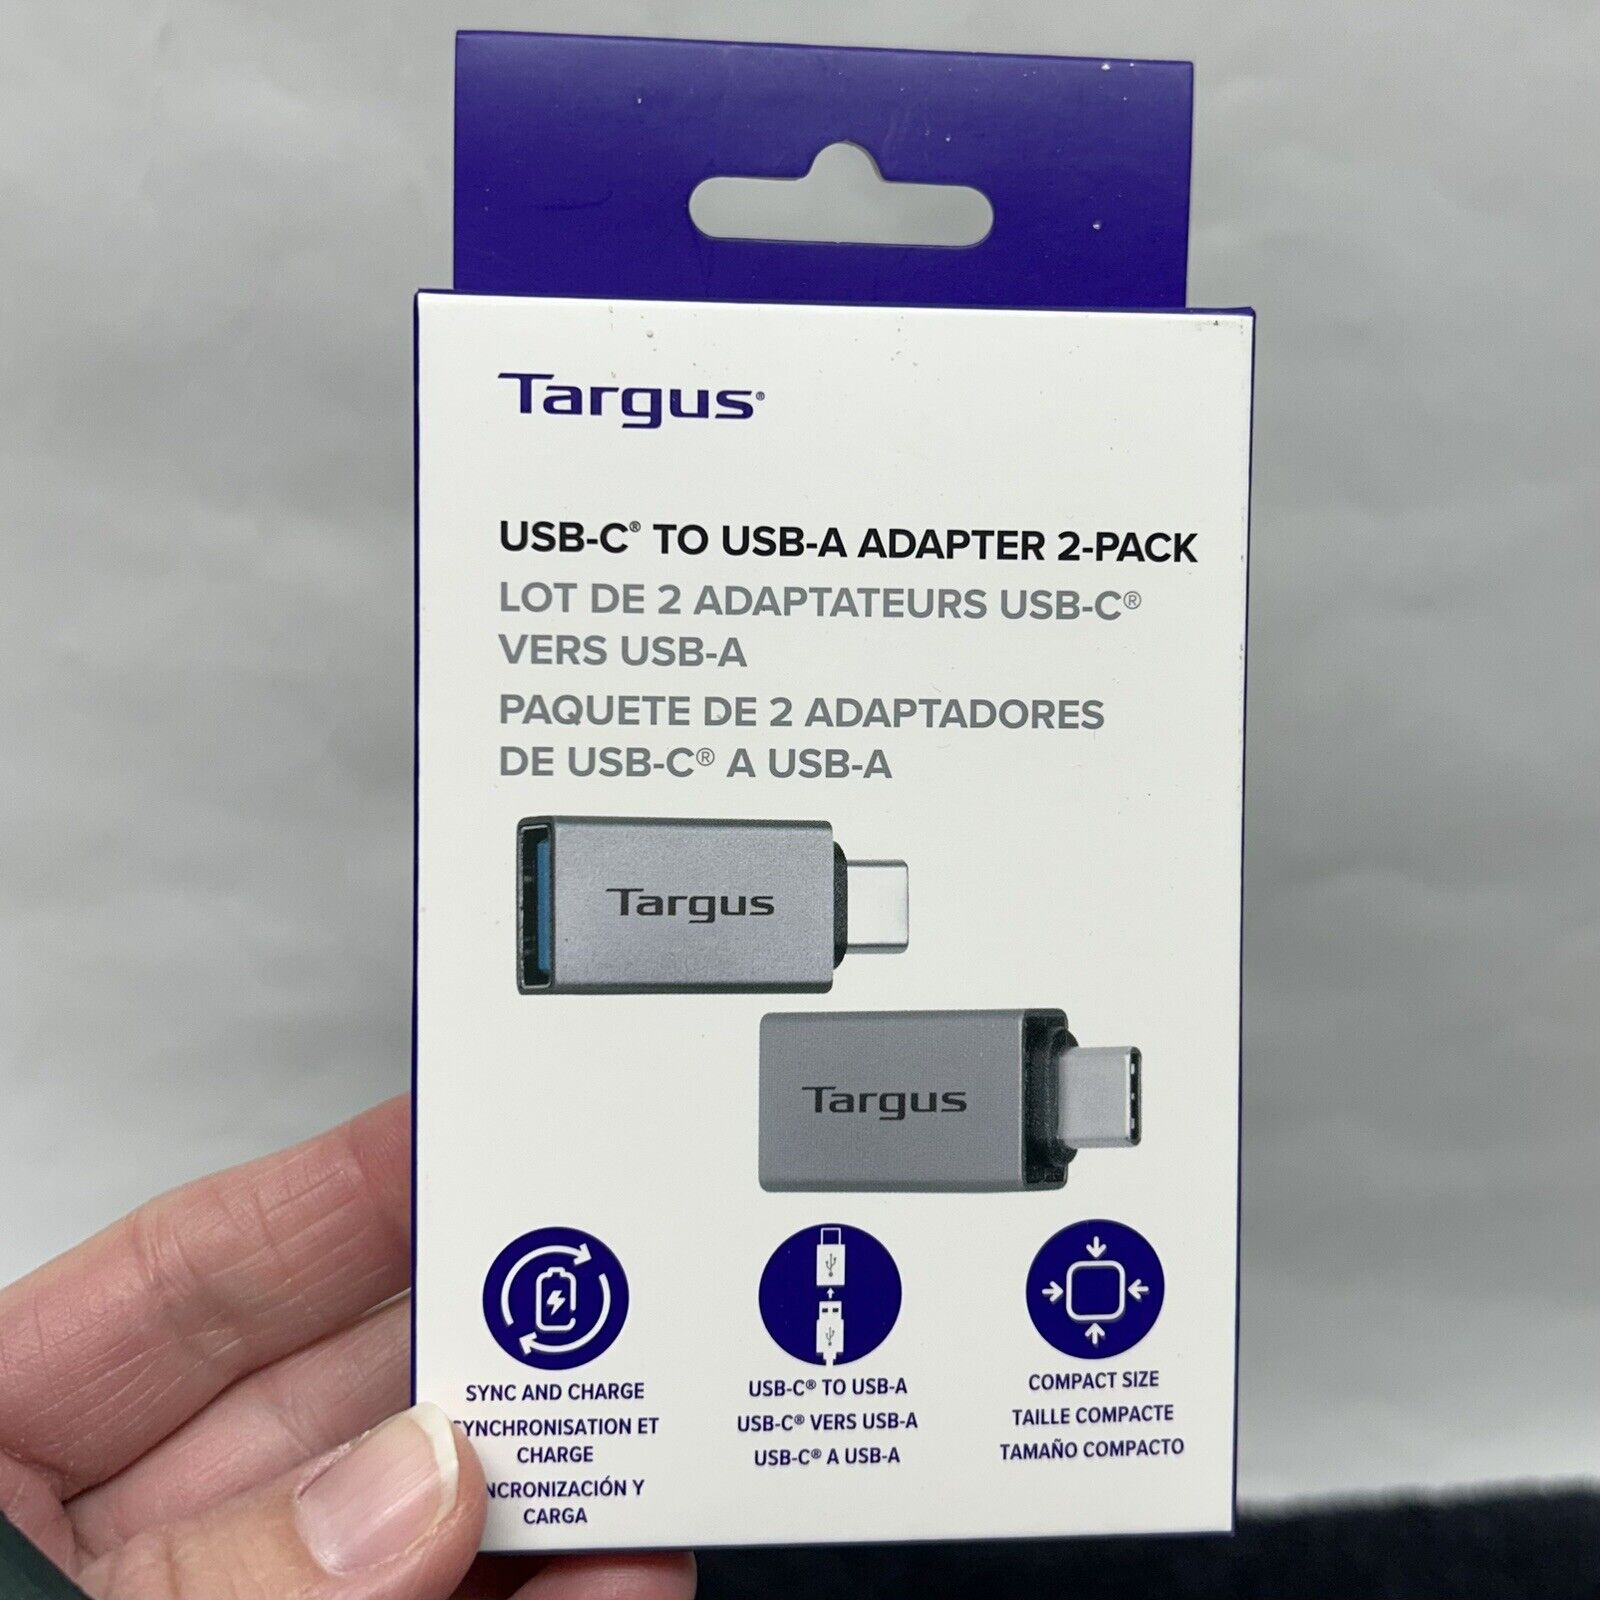 Targus� USB-C to USB-A Adapters, Silver, Pack of 2 Adapters, ACA979GL (C3)